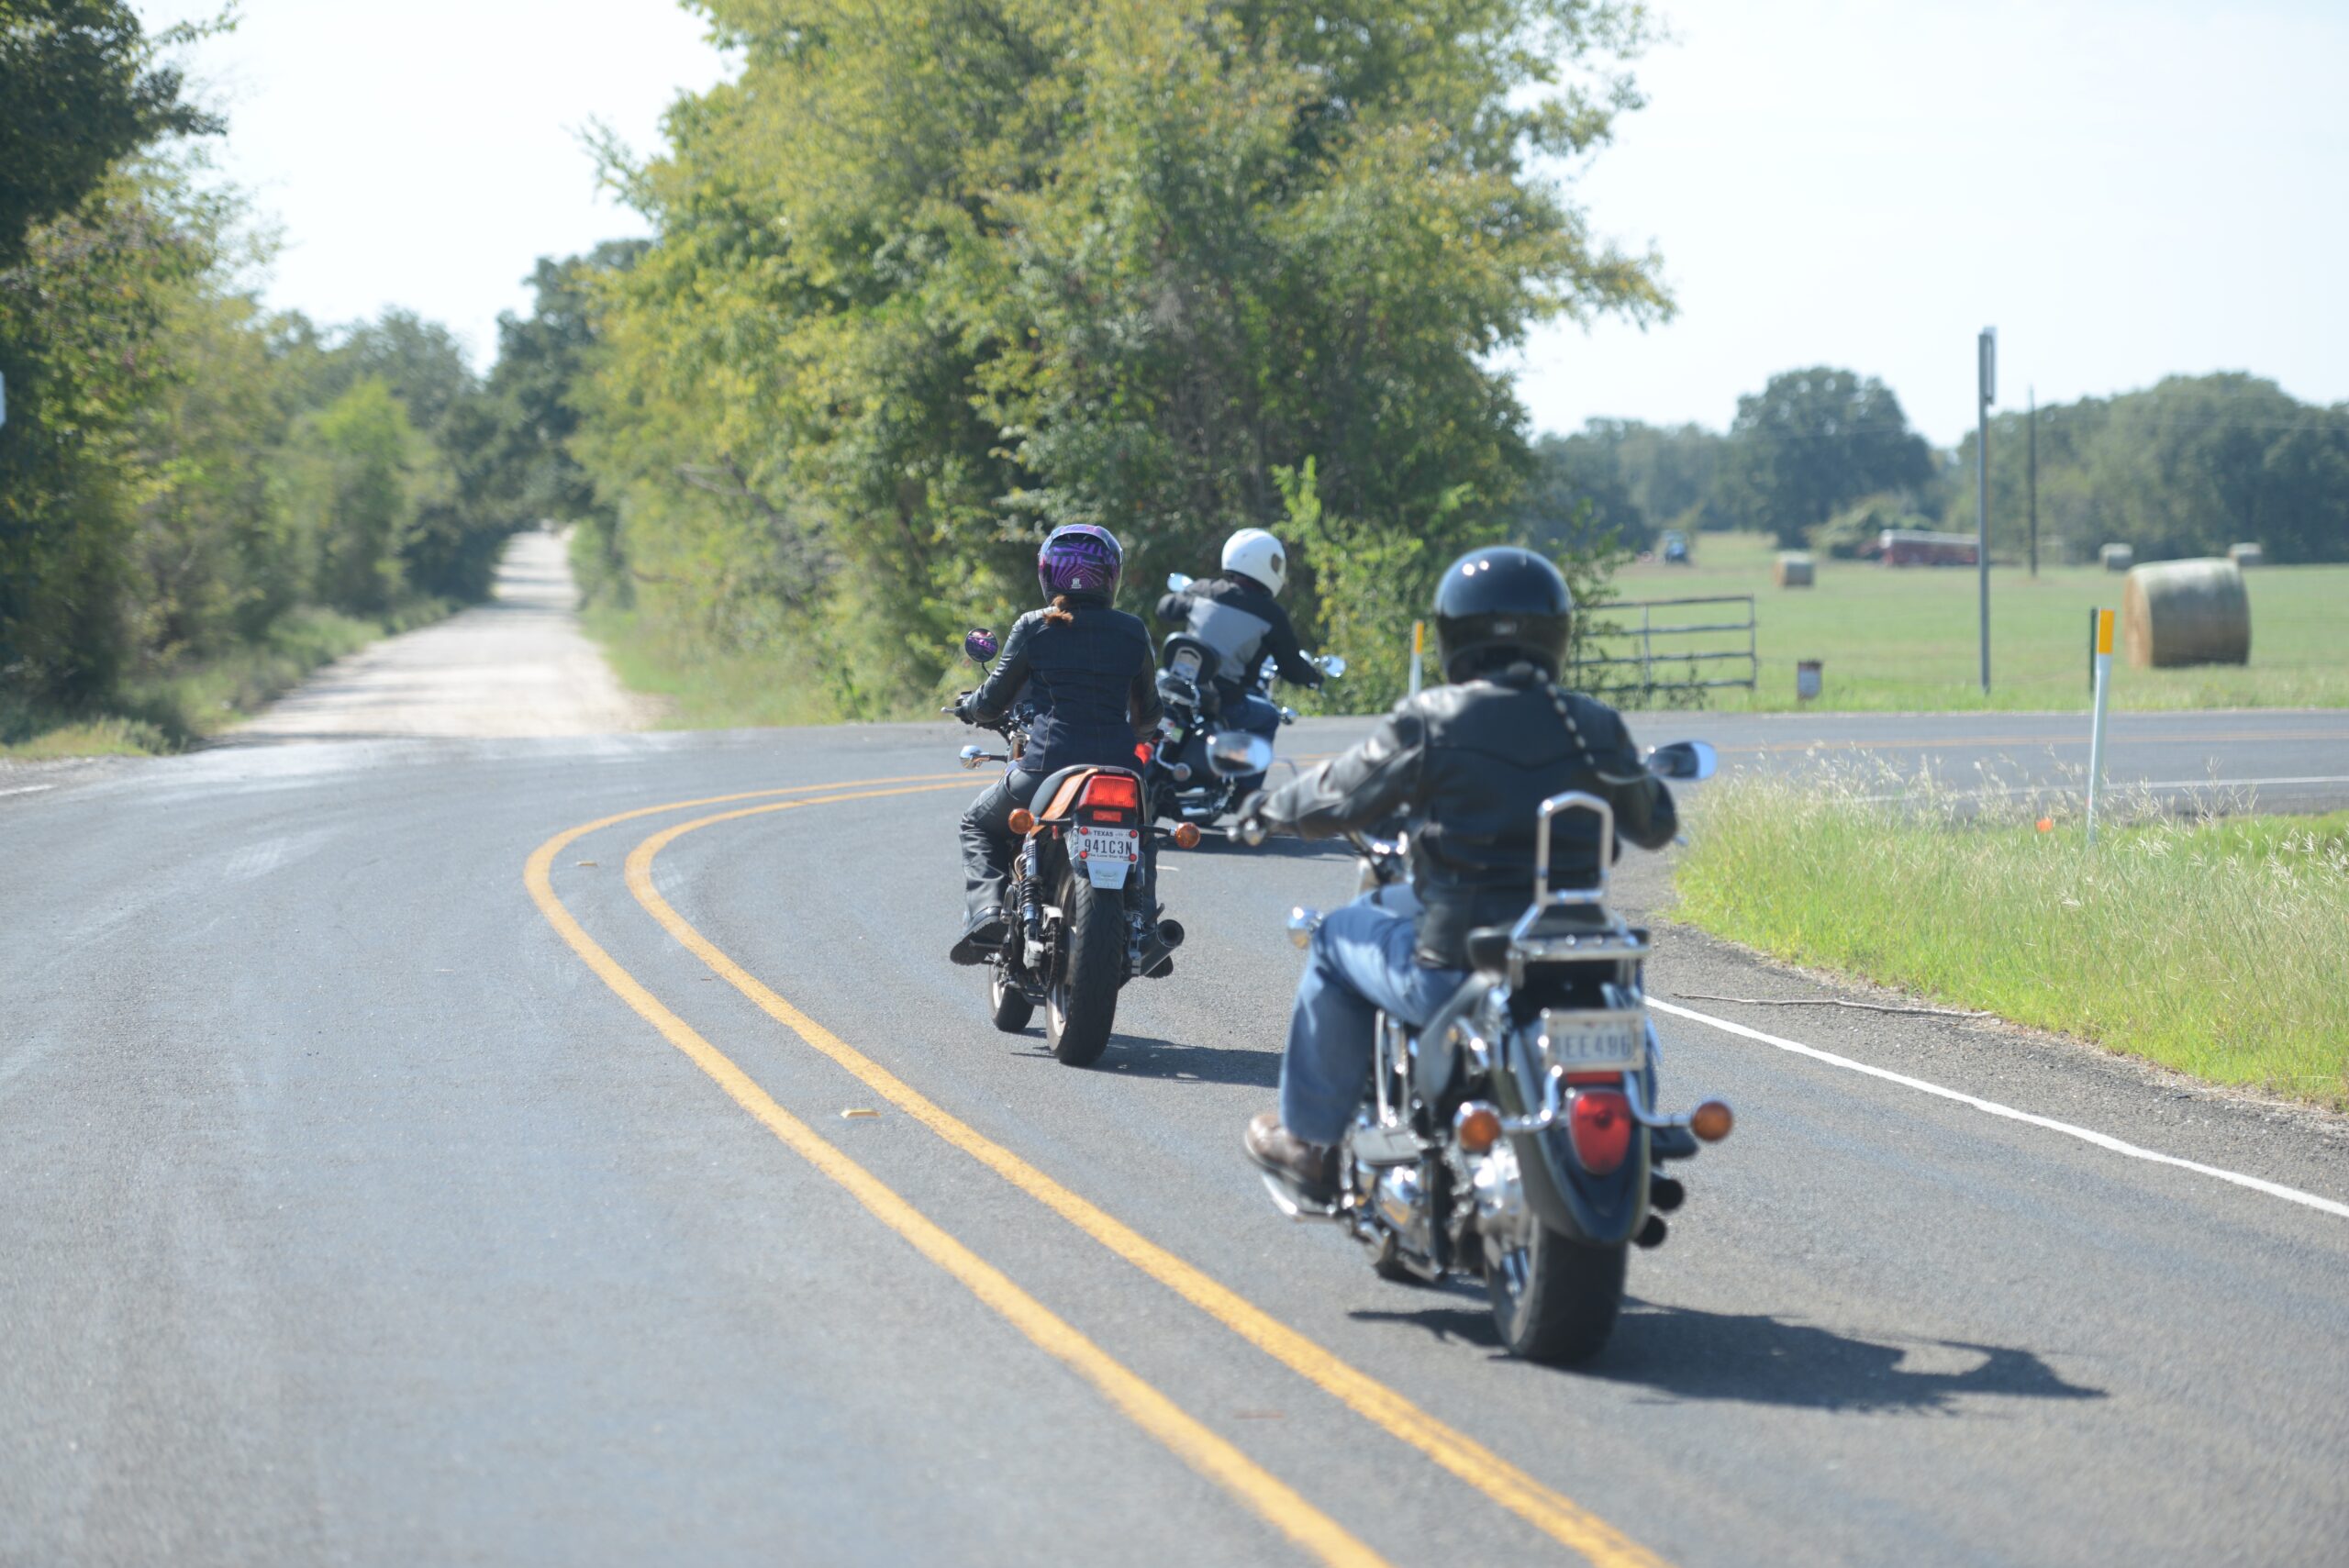 Three motorcyclists riding on rural roadway